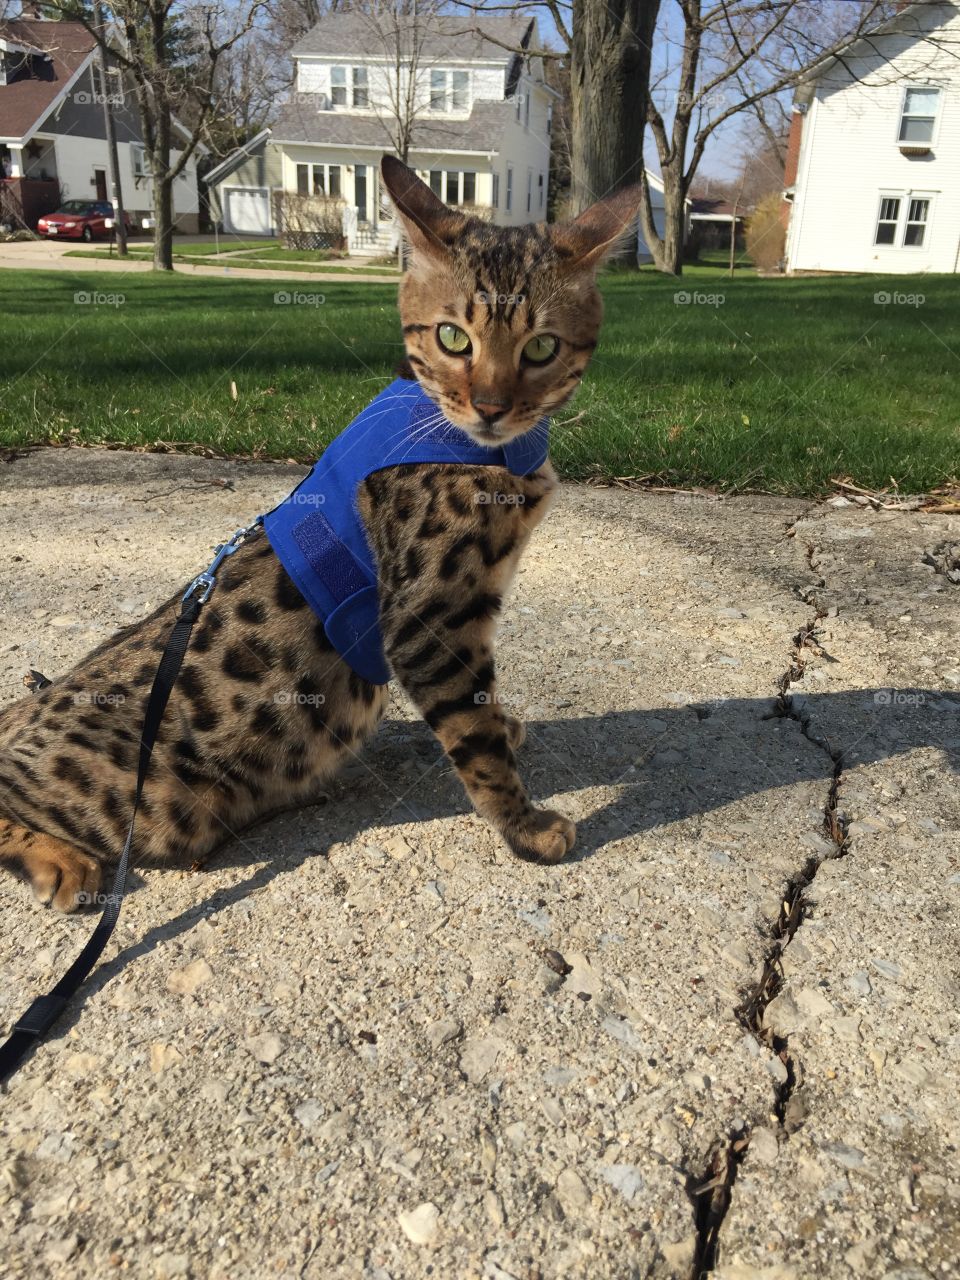 What? Cats can go for walks too